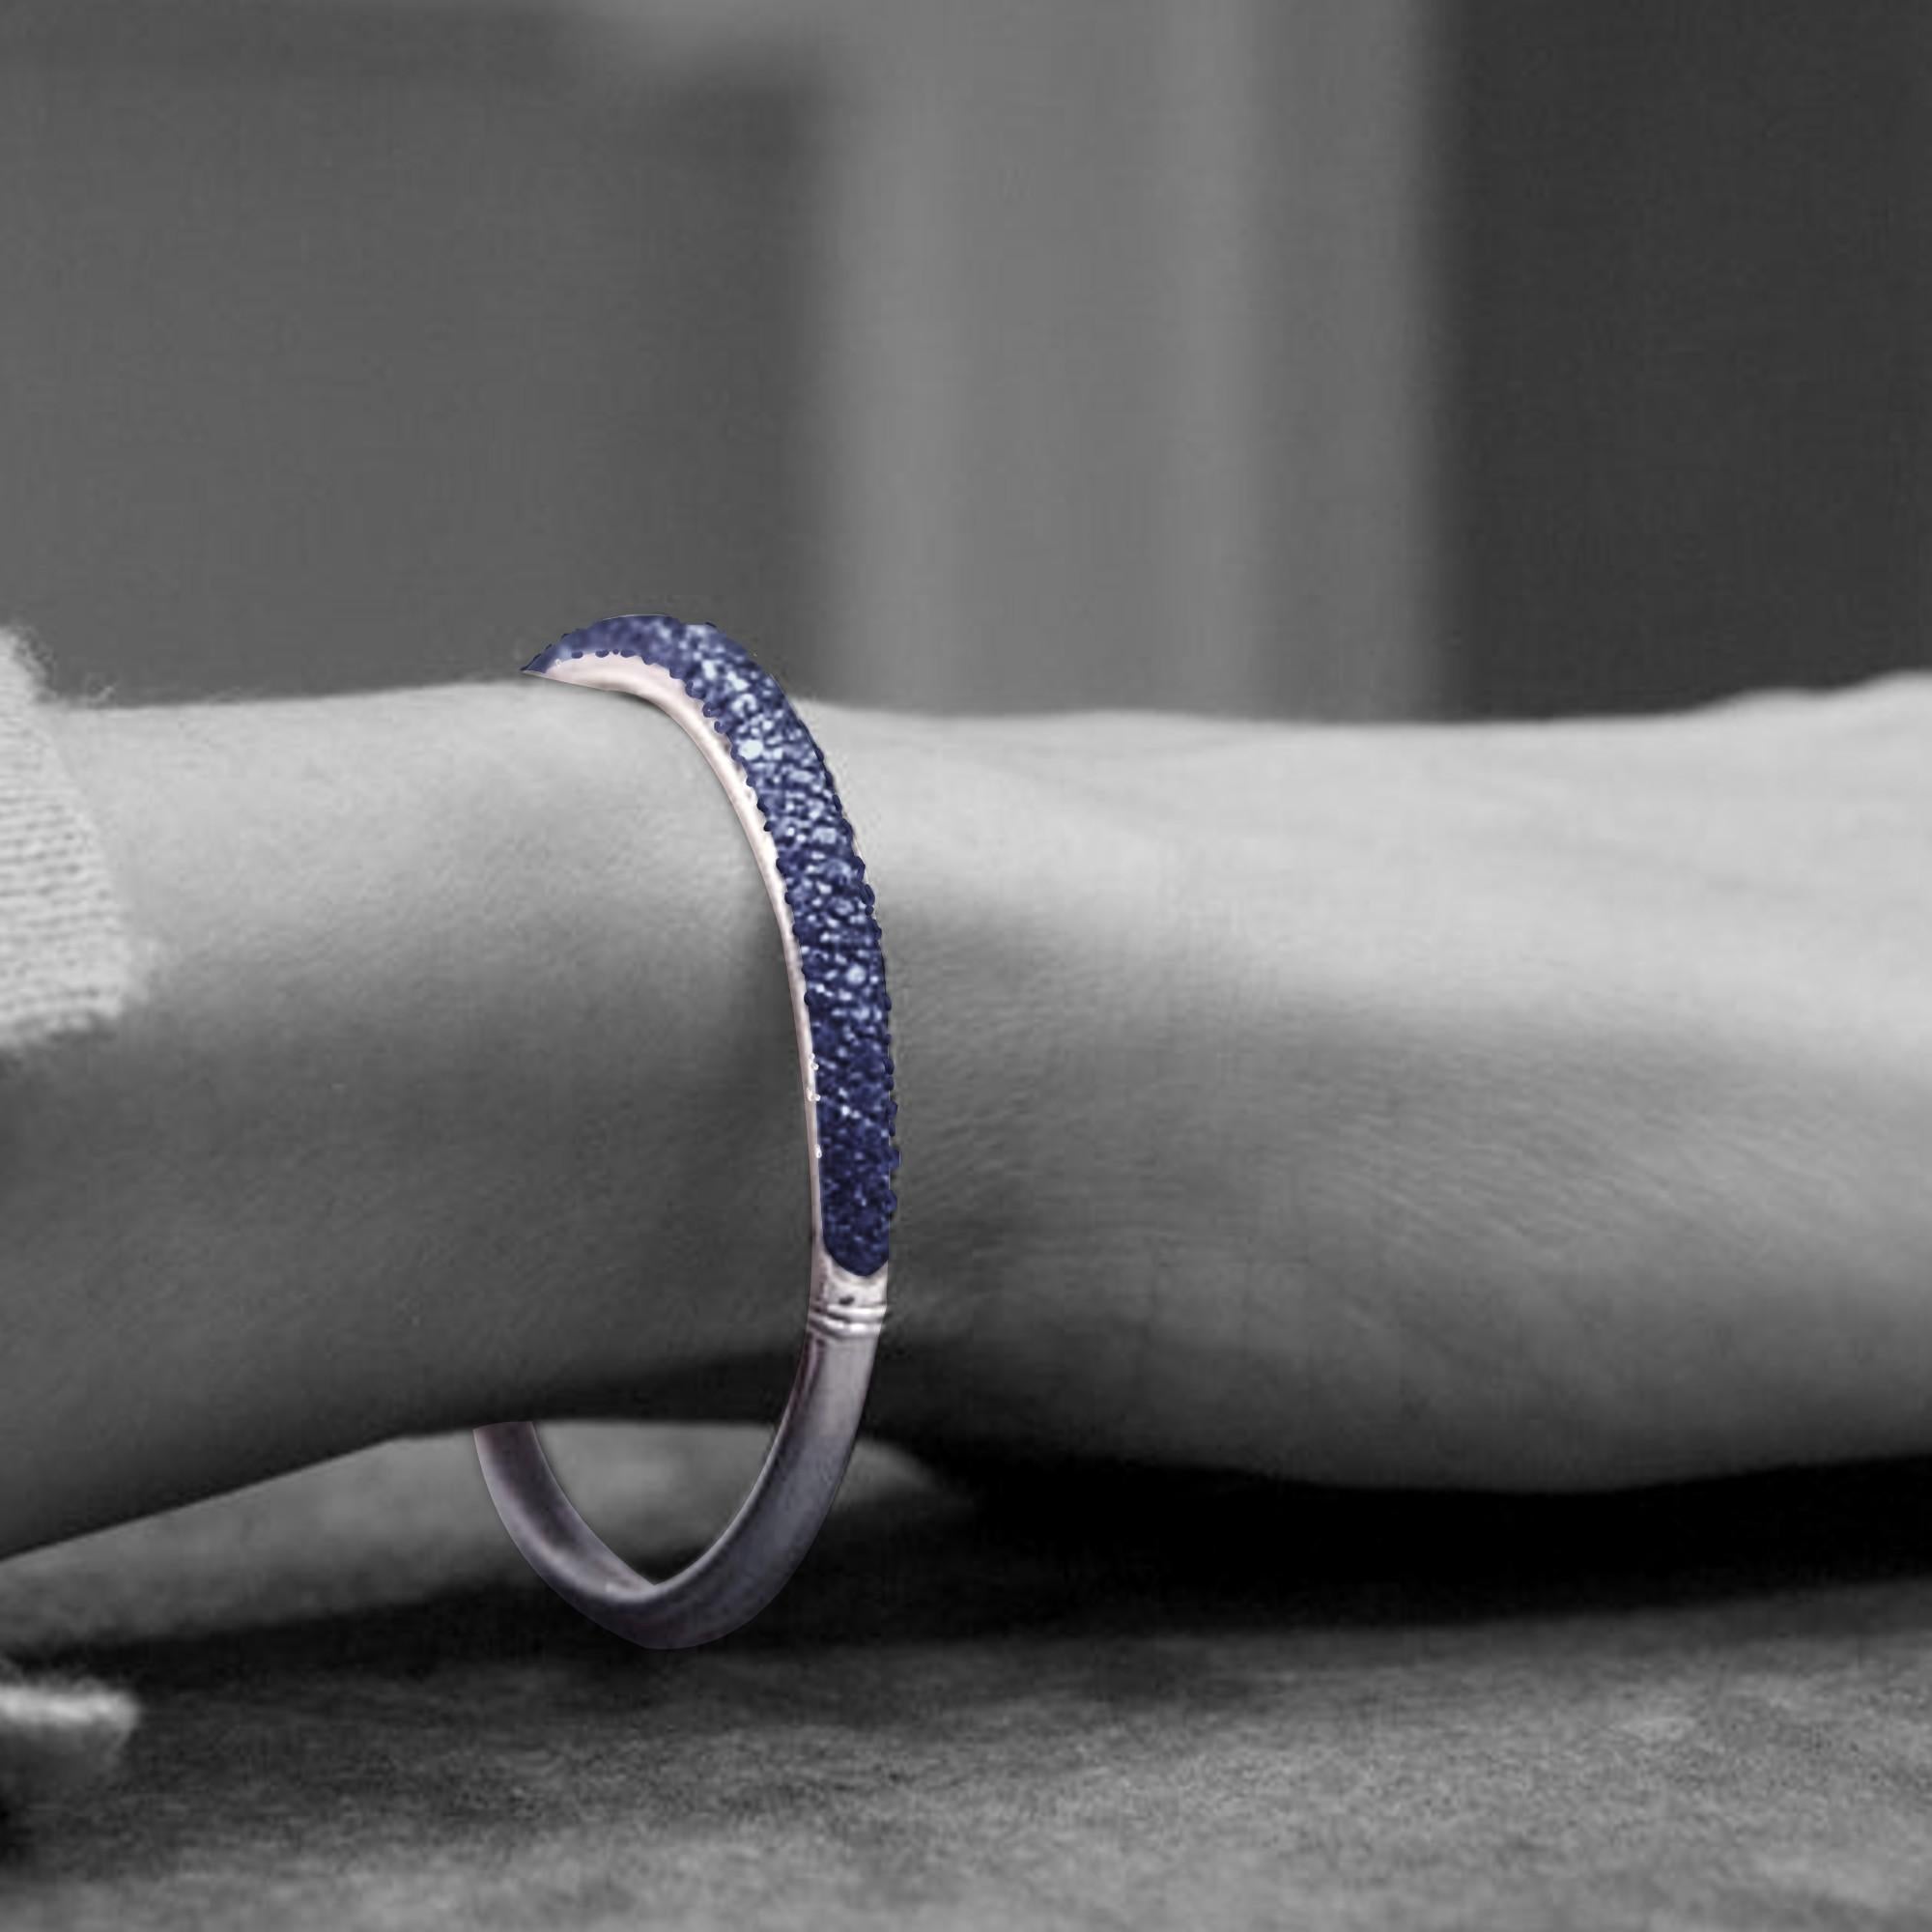 Alex Jona design collection, hand crafted in Italy, 18 karat white gold bangle bracelet set with a blue sapphire pavé consisting of 103 Burmese blue sapphires weight  5.34 carats in total.

Alex Jona jewels stand out, not only for their special